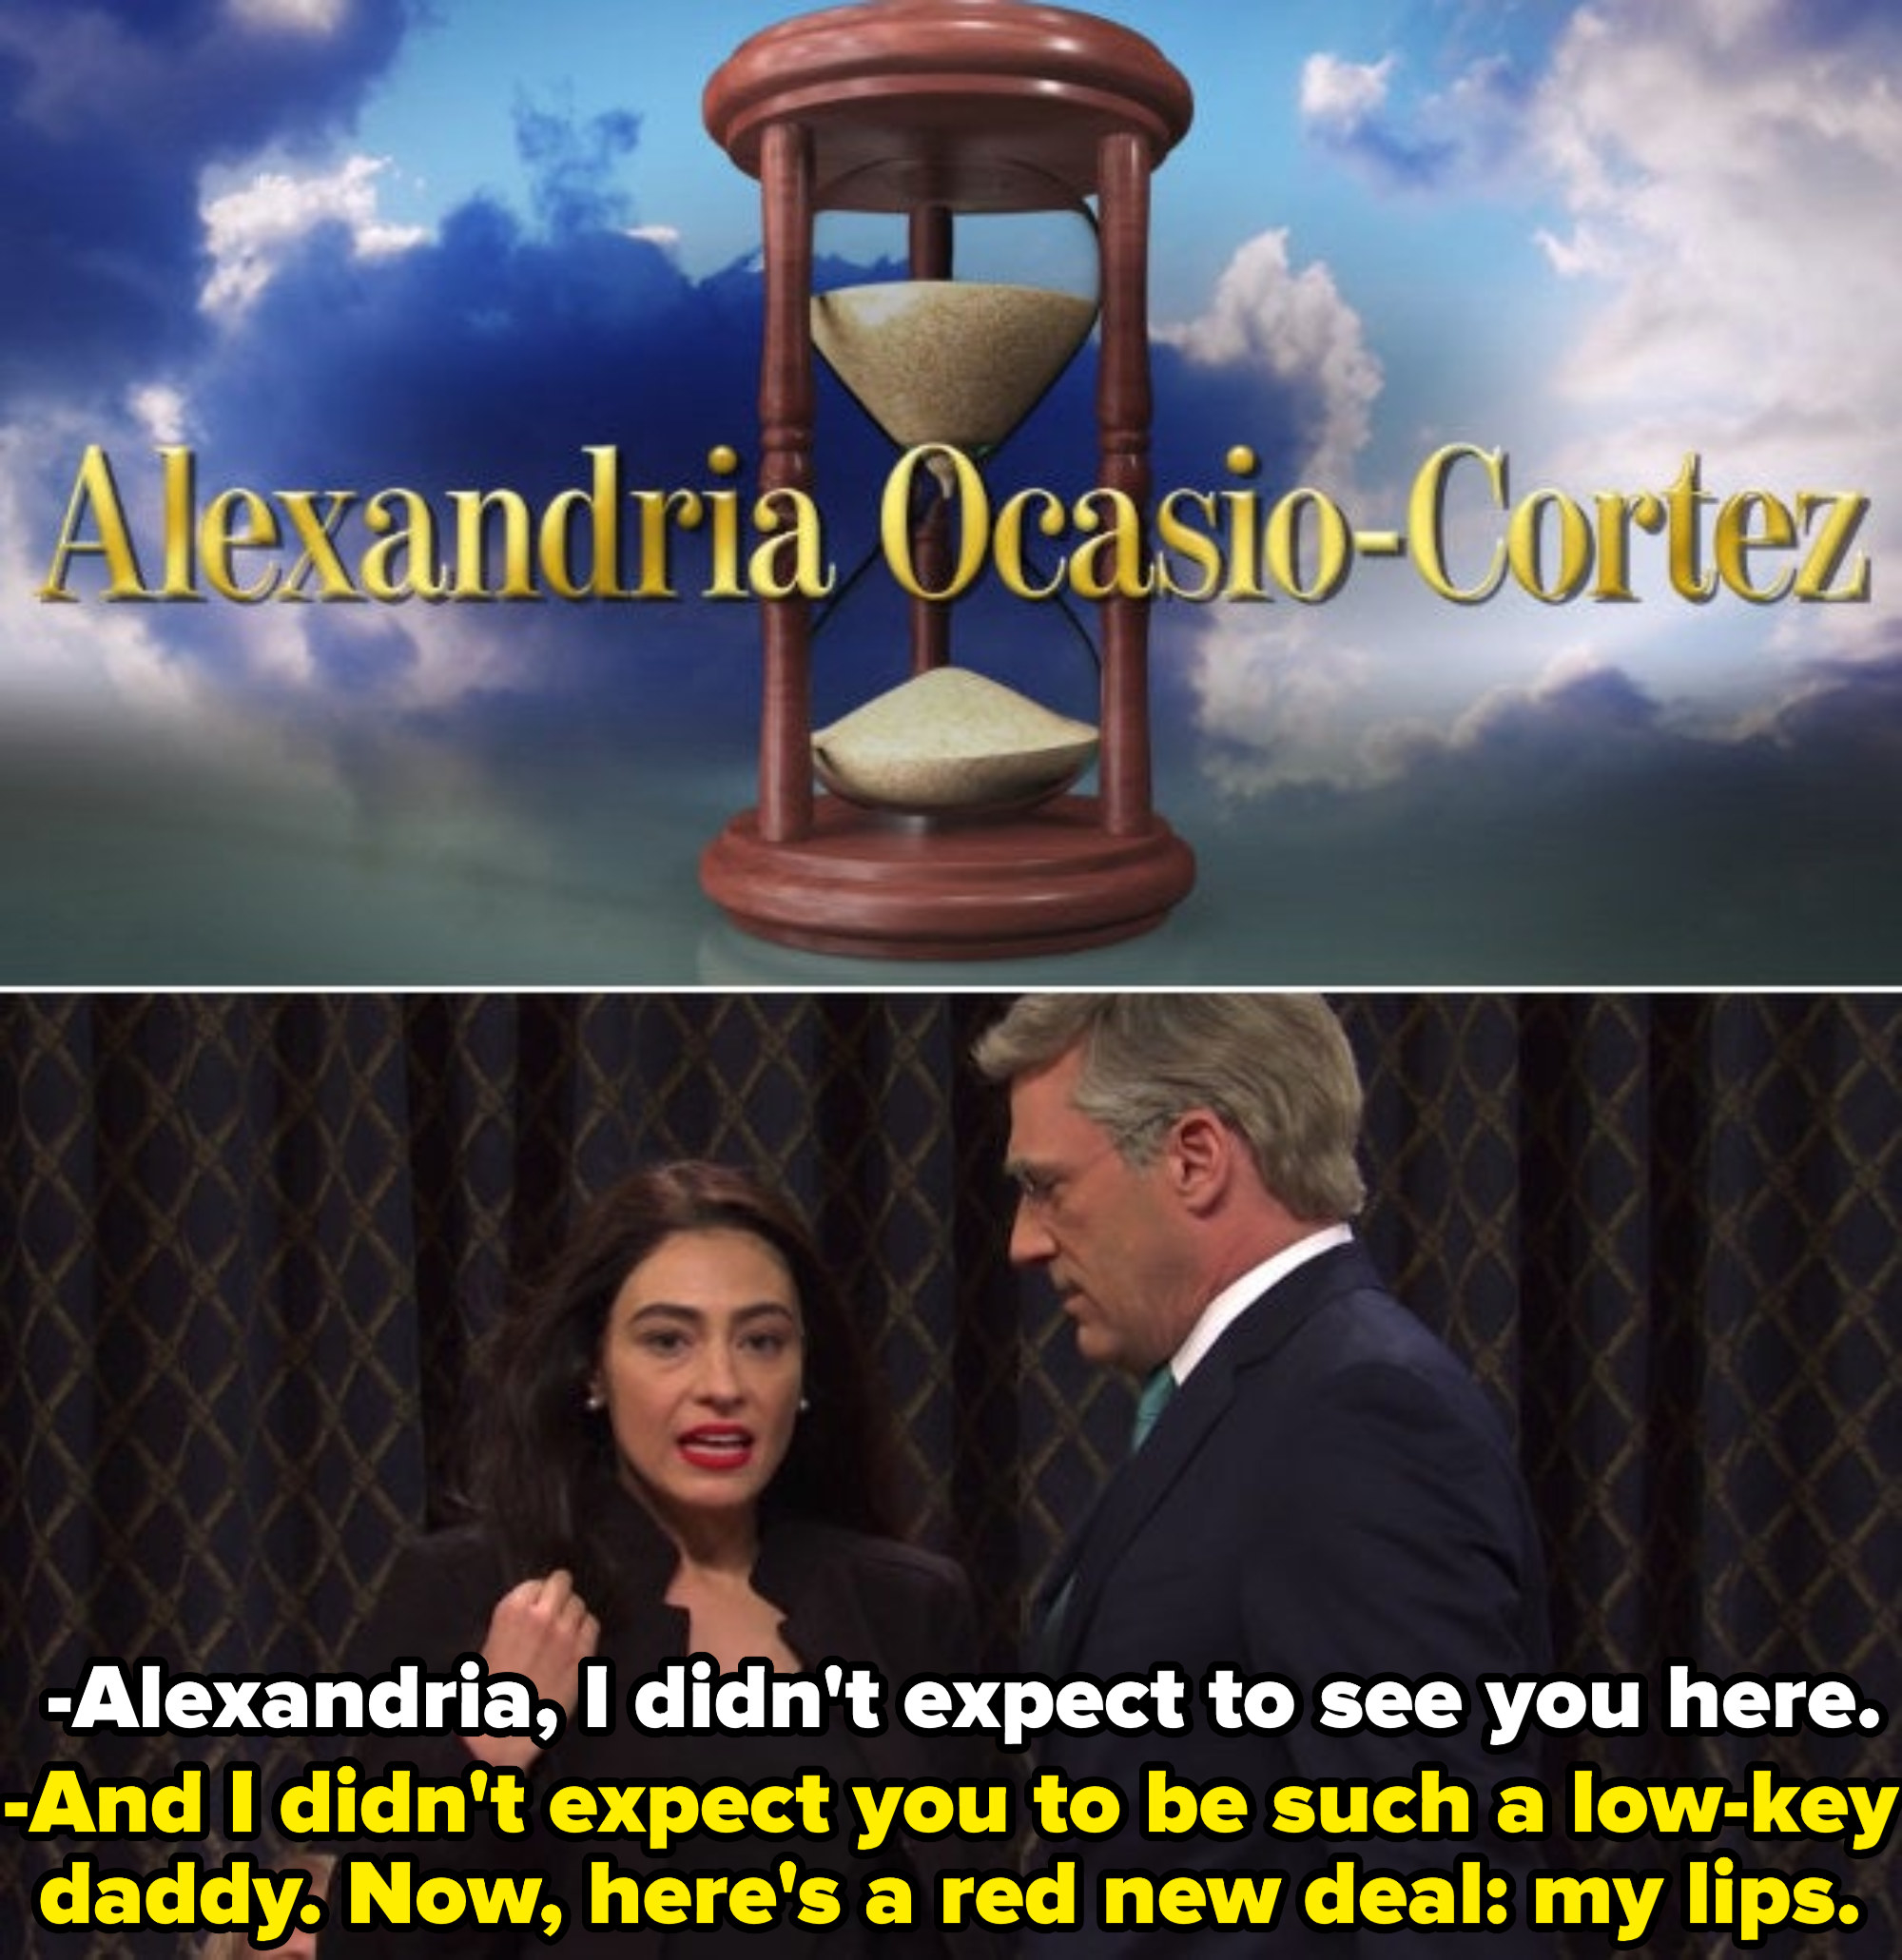 Melissa Villaseñor as Alexandria Ocasio-Cortez spoofing her use of &quot;millennial slang&quot; and wearing her signature red lipstick